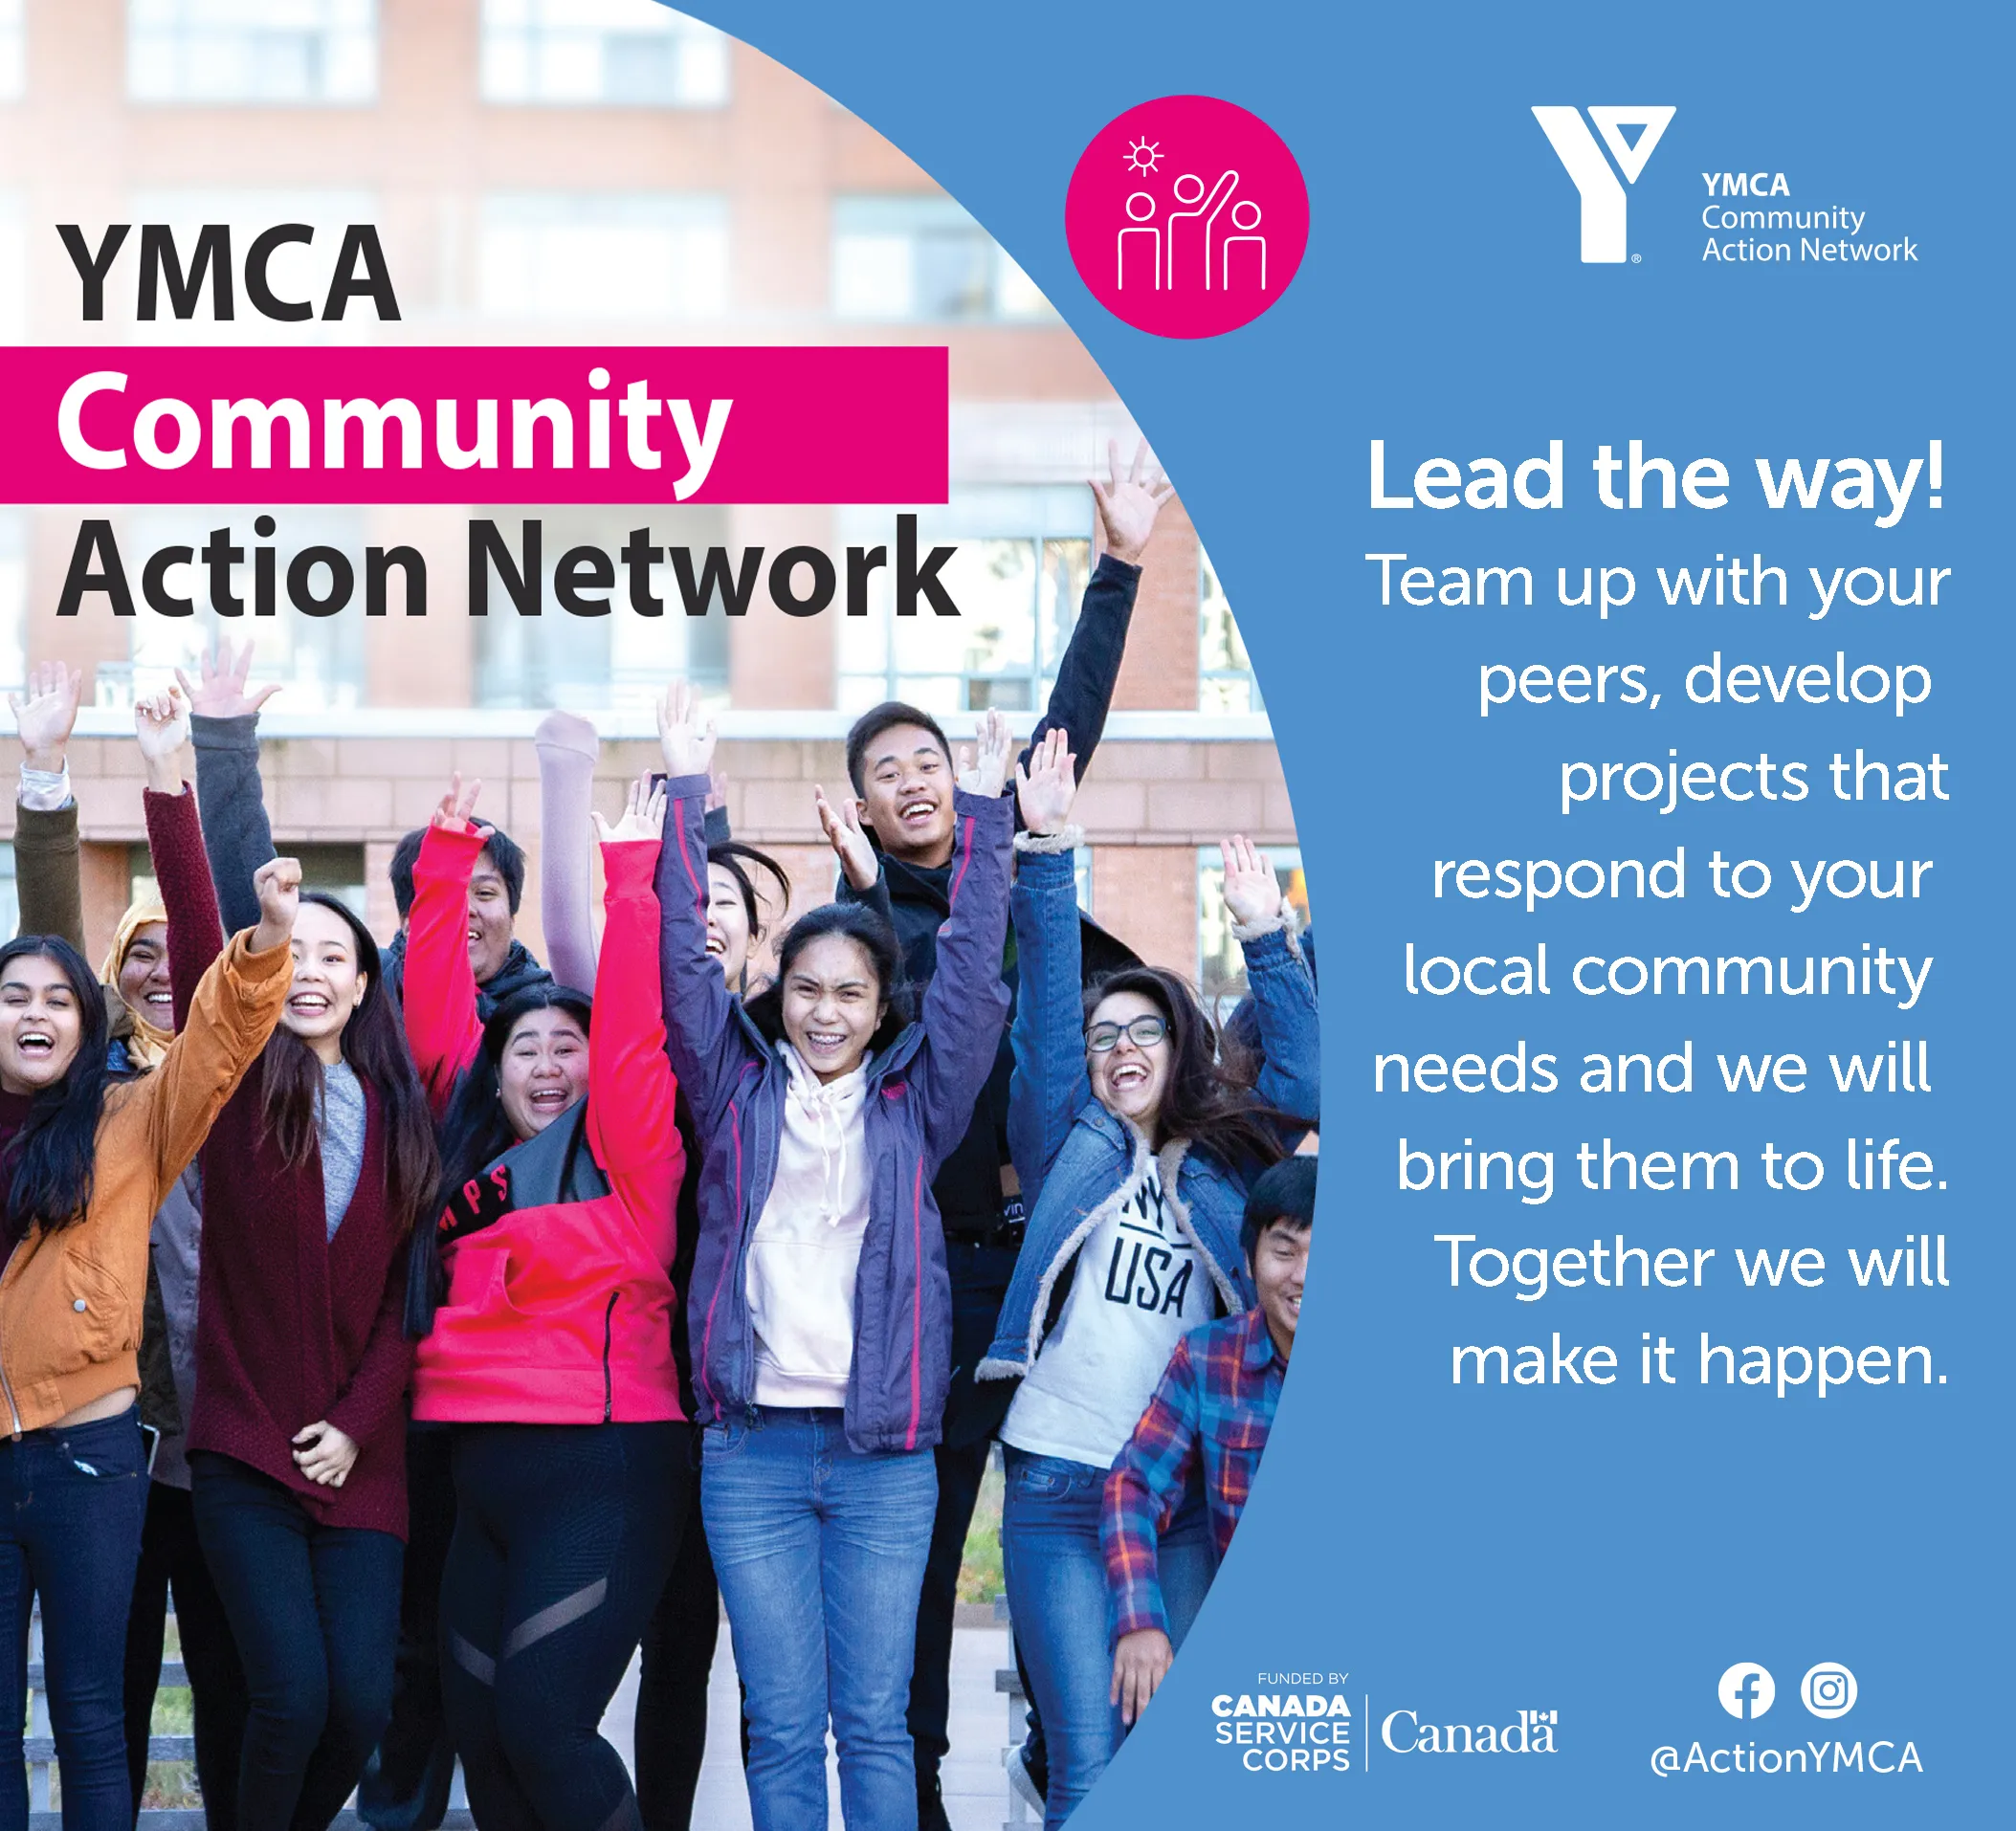 Image of a group of youth celebrating. Text reads" Lead the way! Team up with your peers, develop projects that respond to your local community needs and we will bring them to life. Together we will make it happen." Includes logos for YMCA Community Action Network and Canada Service Corps.